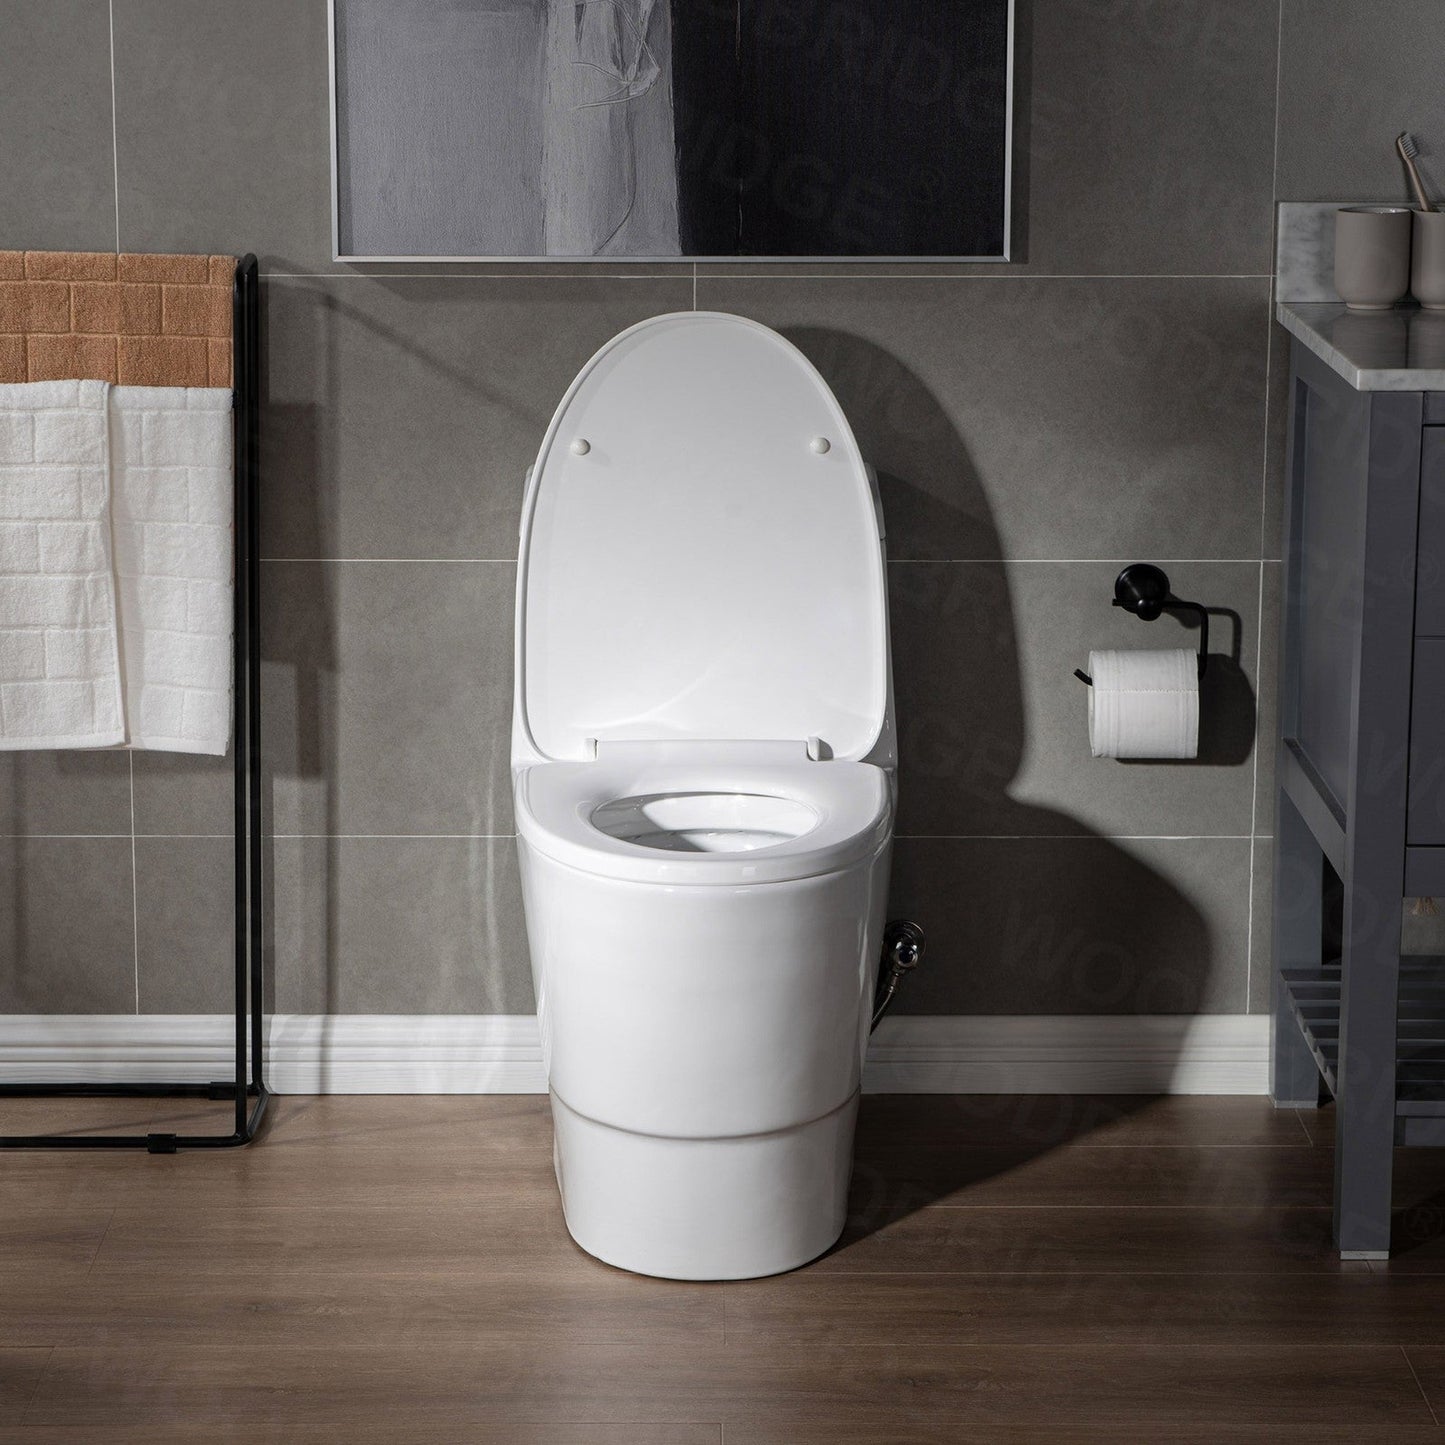 WoodBridge T0001-BN White One Piece Toilet With Soft Closing Seat, Chair Height, 1.28 GPF Dual, Water Sensed, 1000 Gram Map Flushing Score Toilet With Brushed Nickel Button